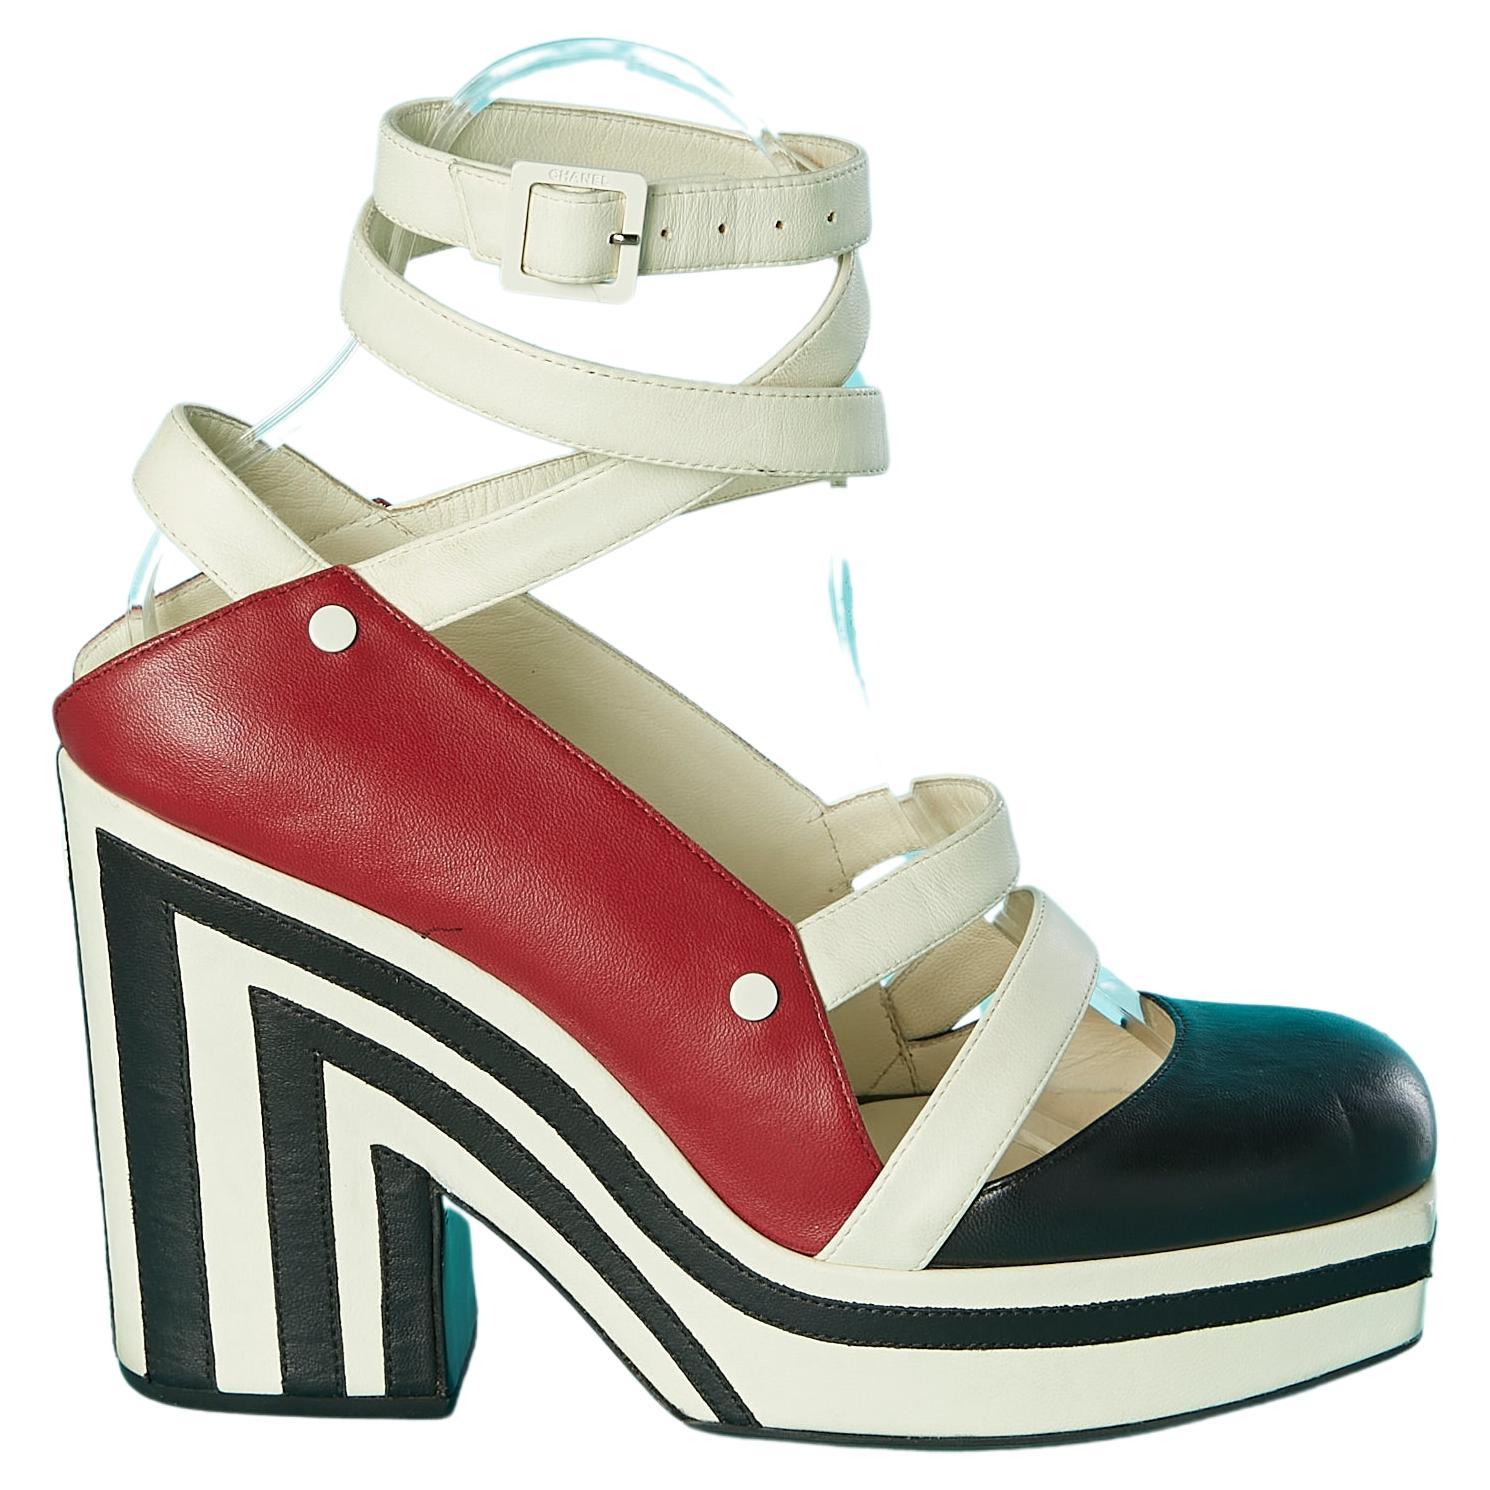 Graphic plateform sandals with ankle straps Chanel SS 2013 For Sale